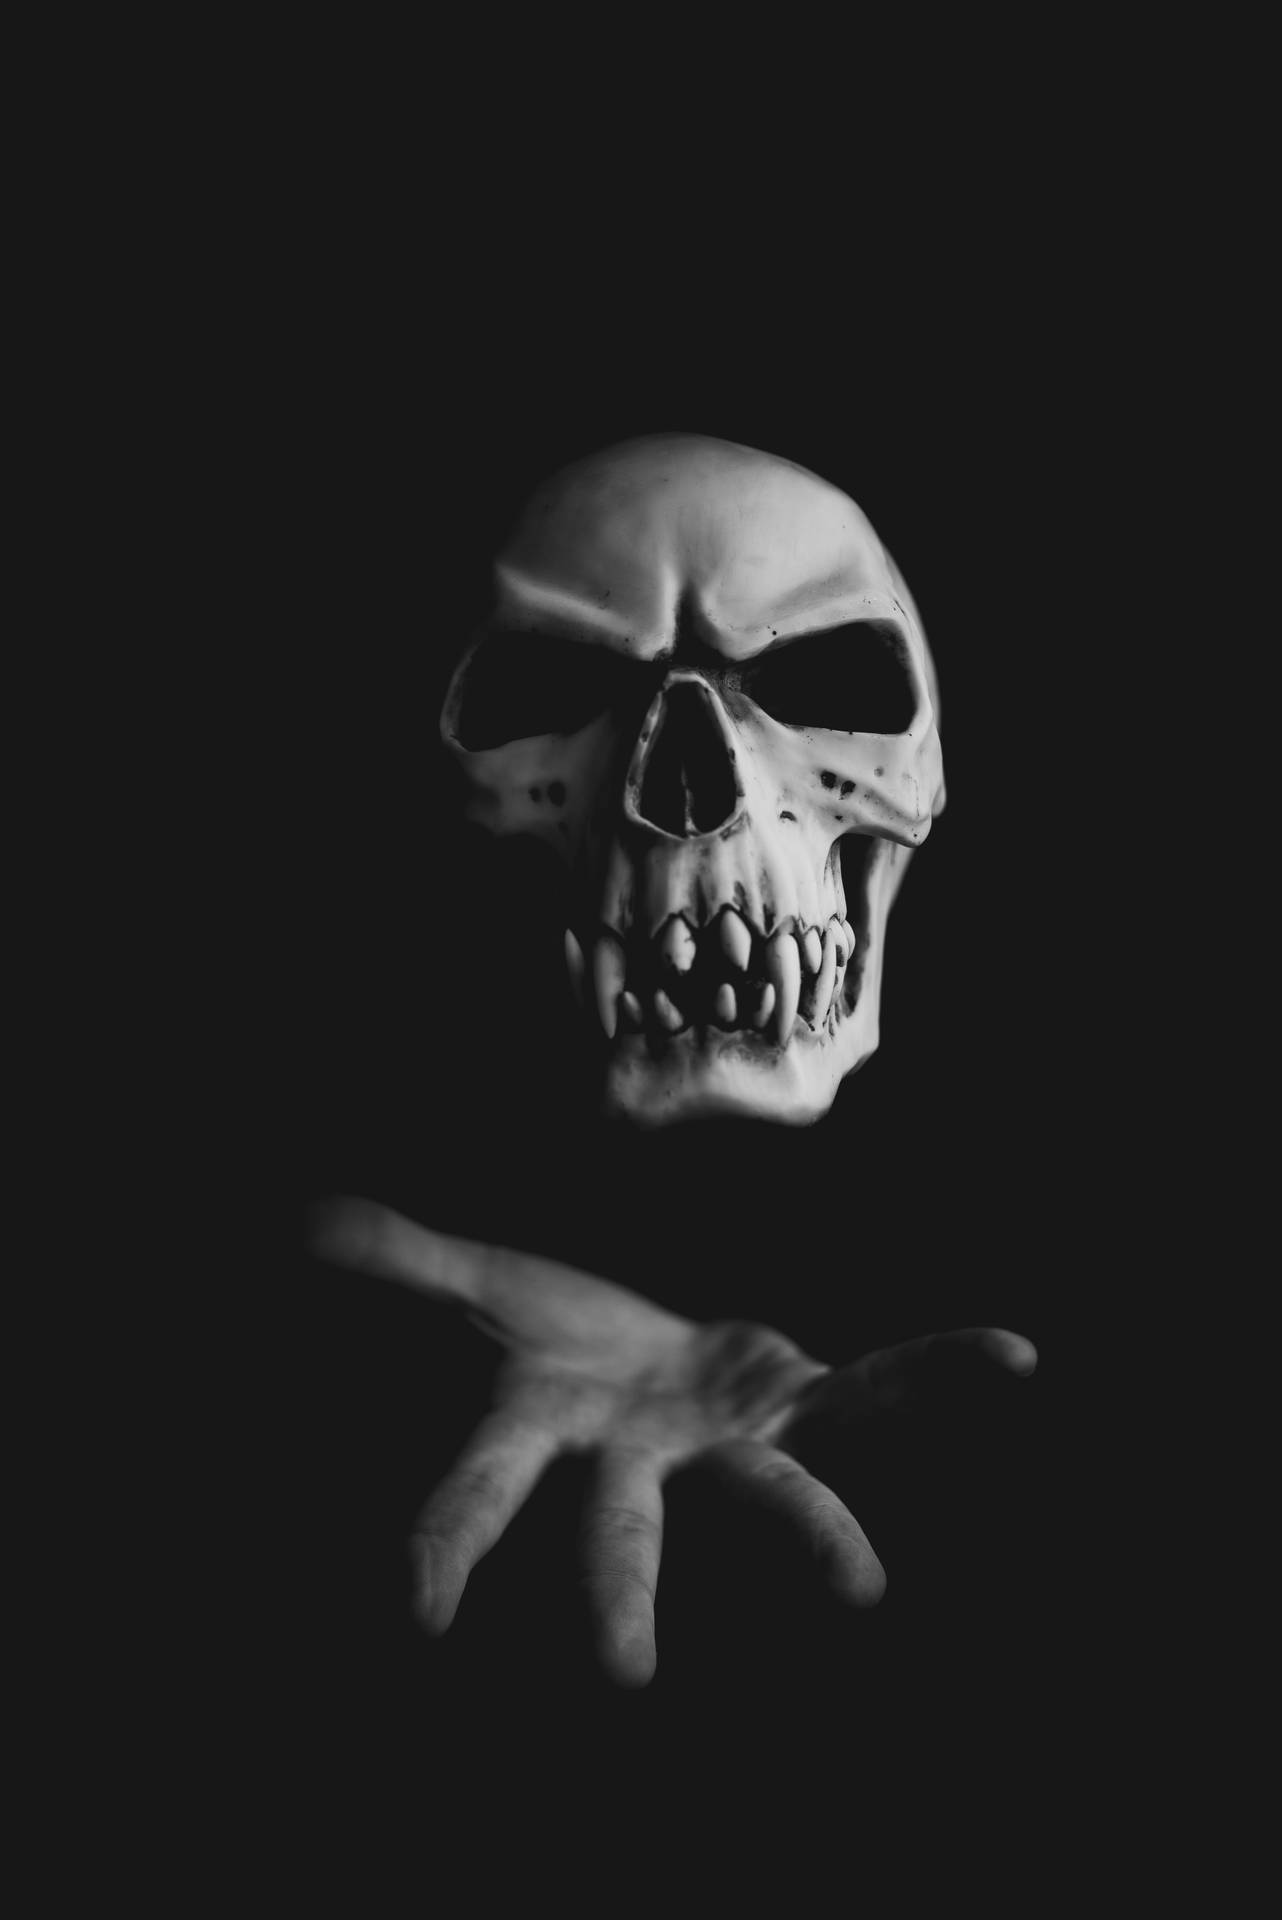 4016X6016 Skull Wallpaper and Background